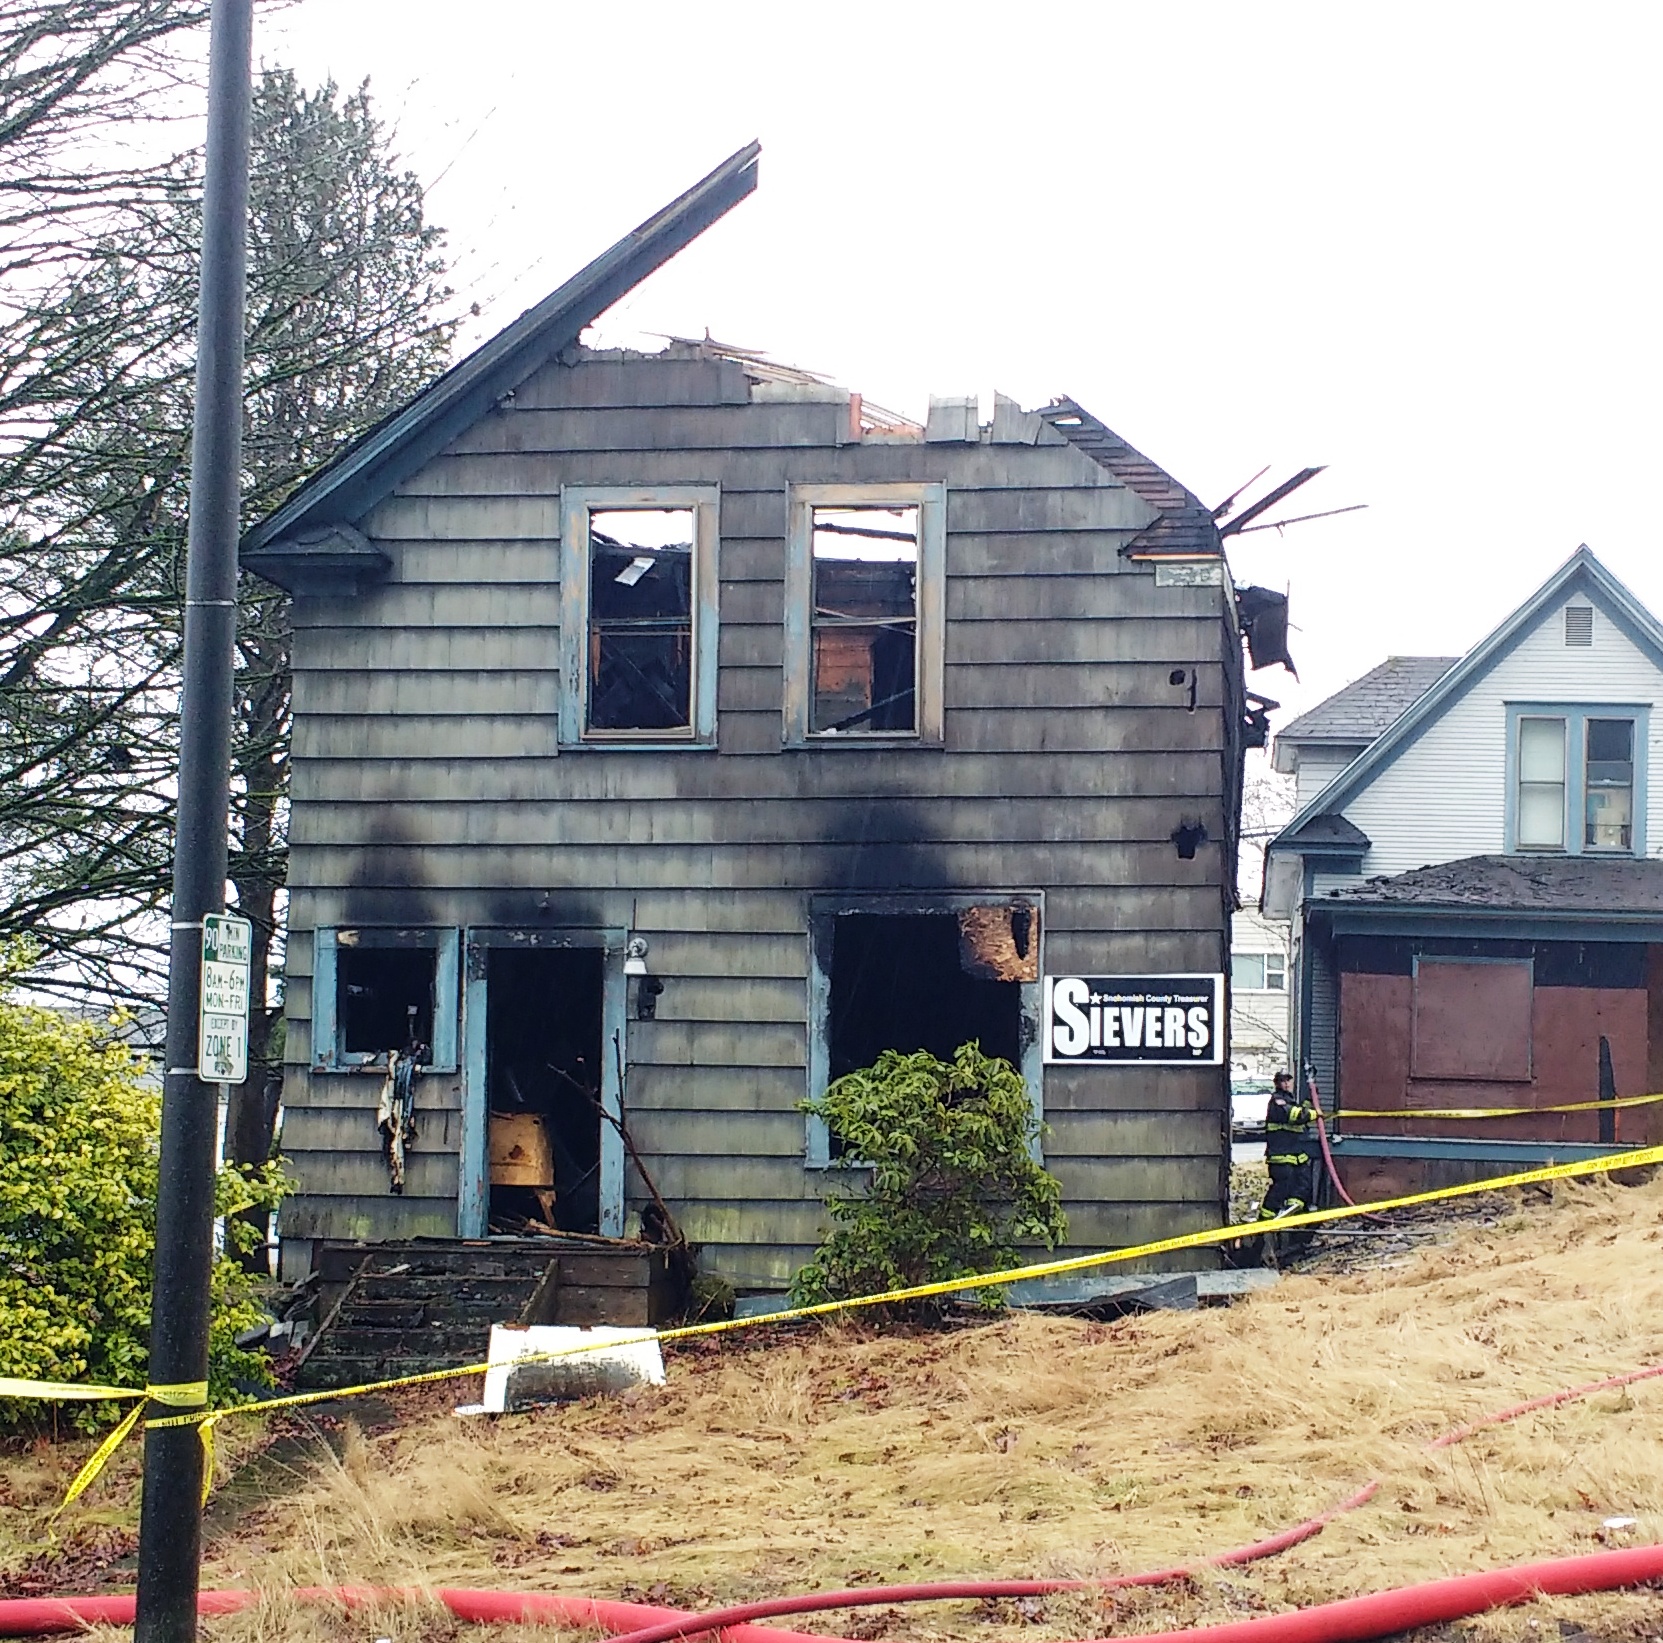 Fire Destroys Abandoned House On Pacific | MYEVERETTNEWS.com